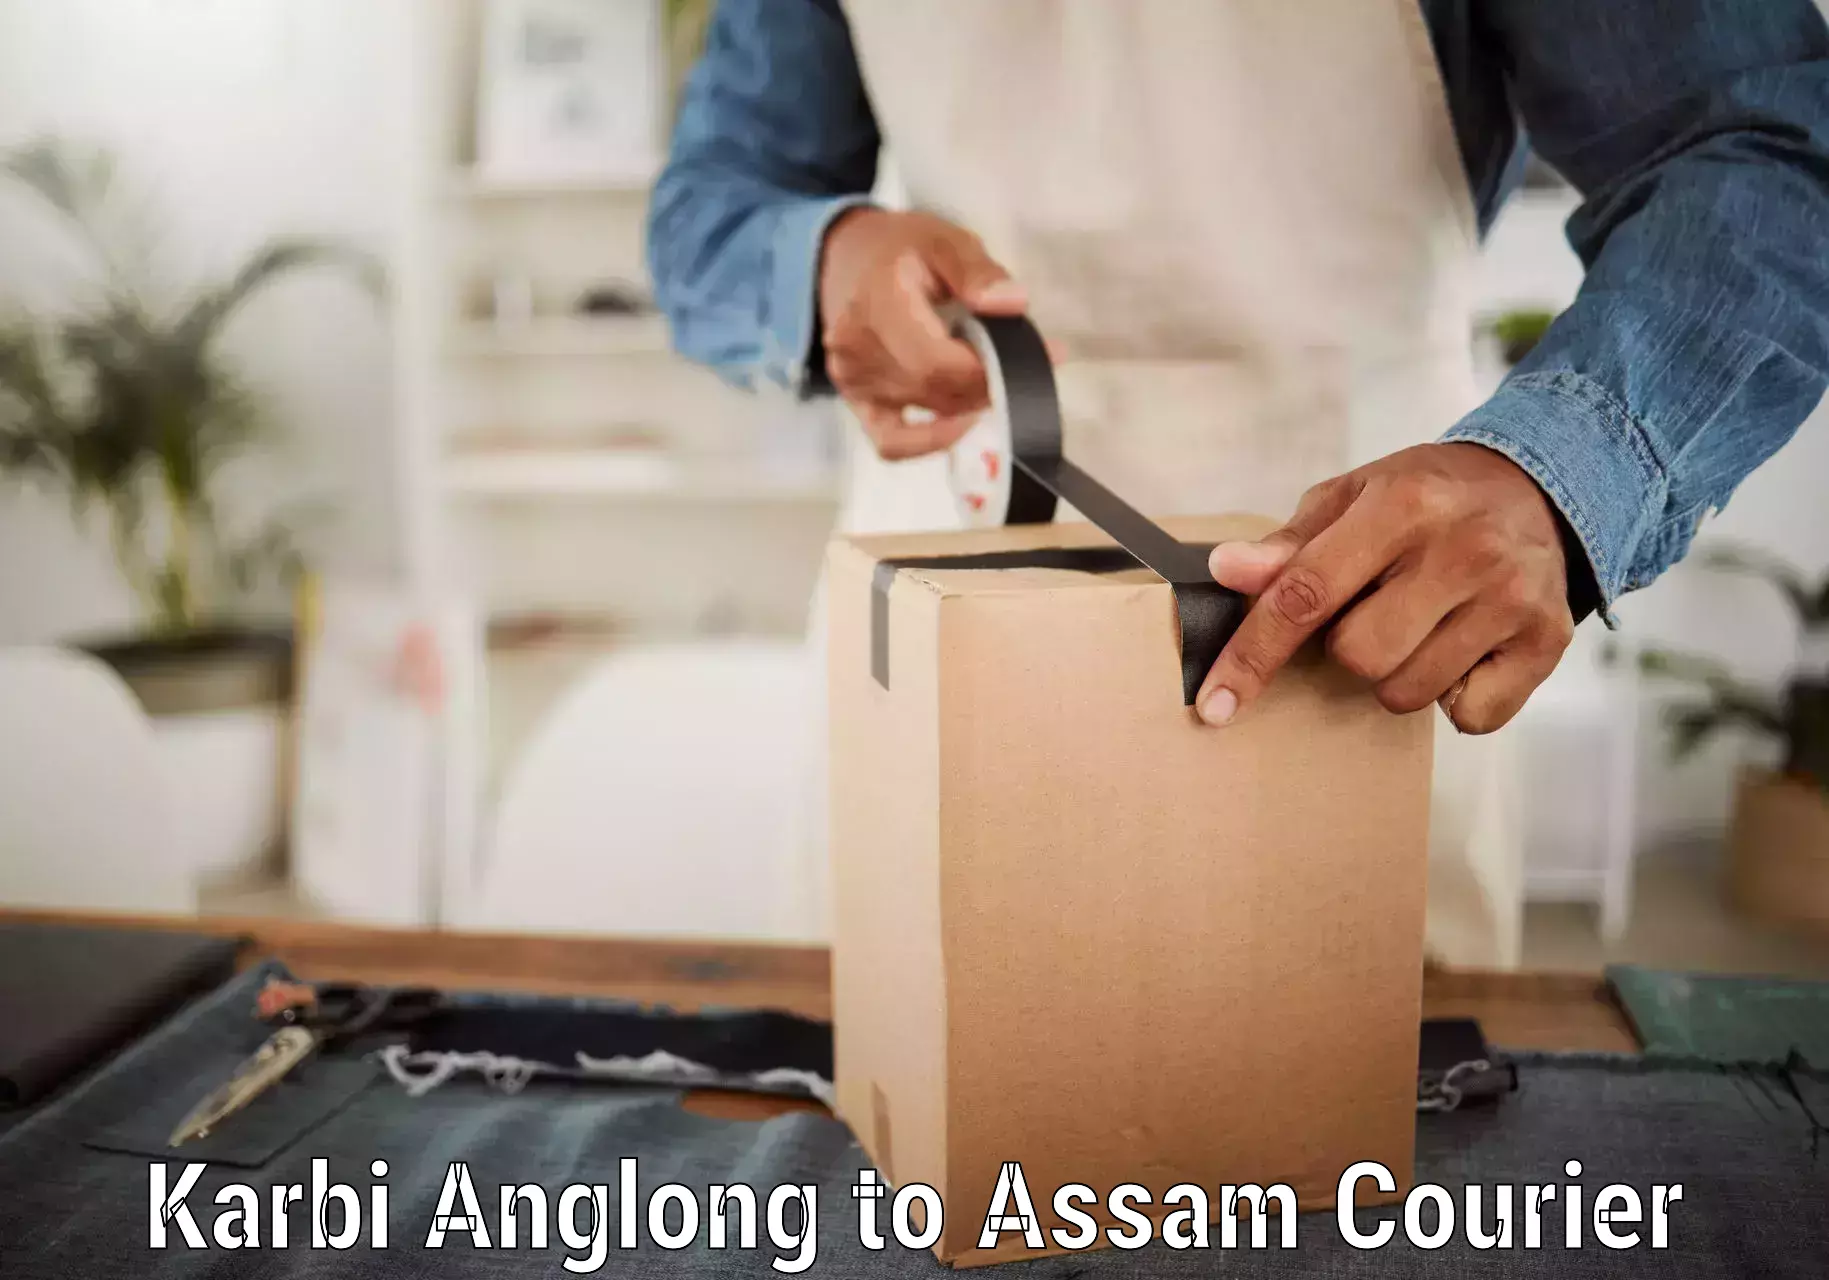 State-of-the-art courier technology Karbi Anglong to Silchar